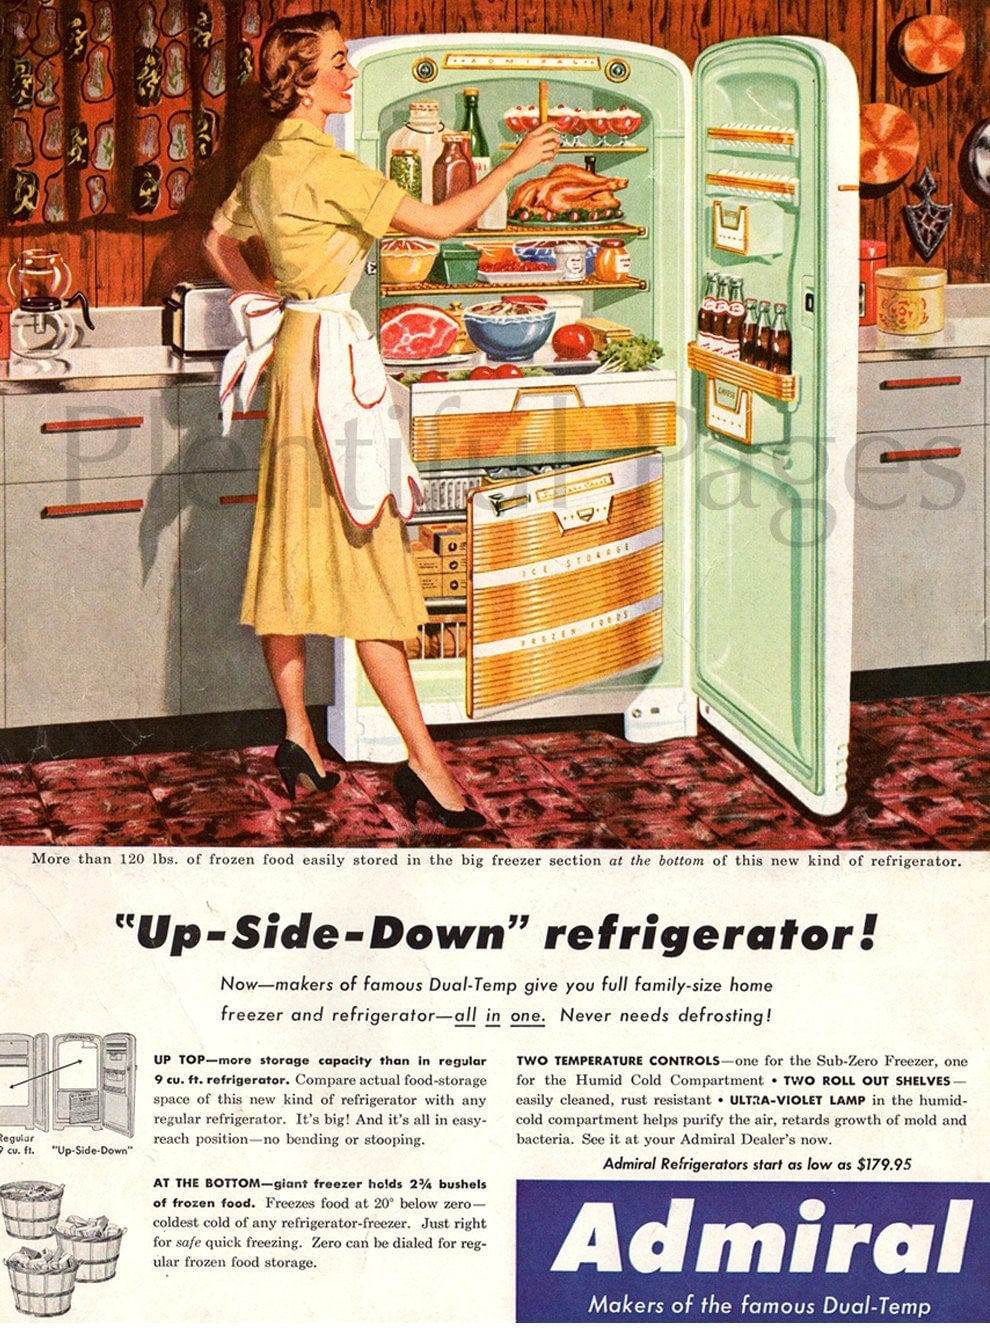 A woman in the 1950s opening an upside-down fridge